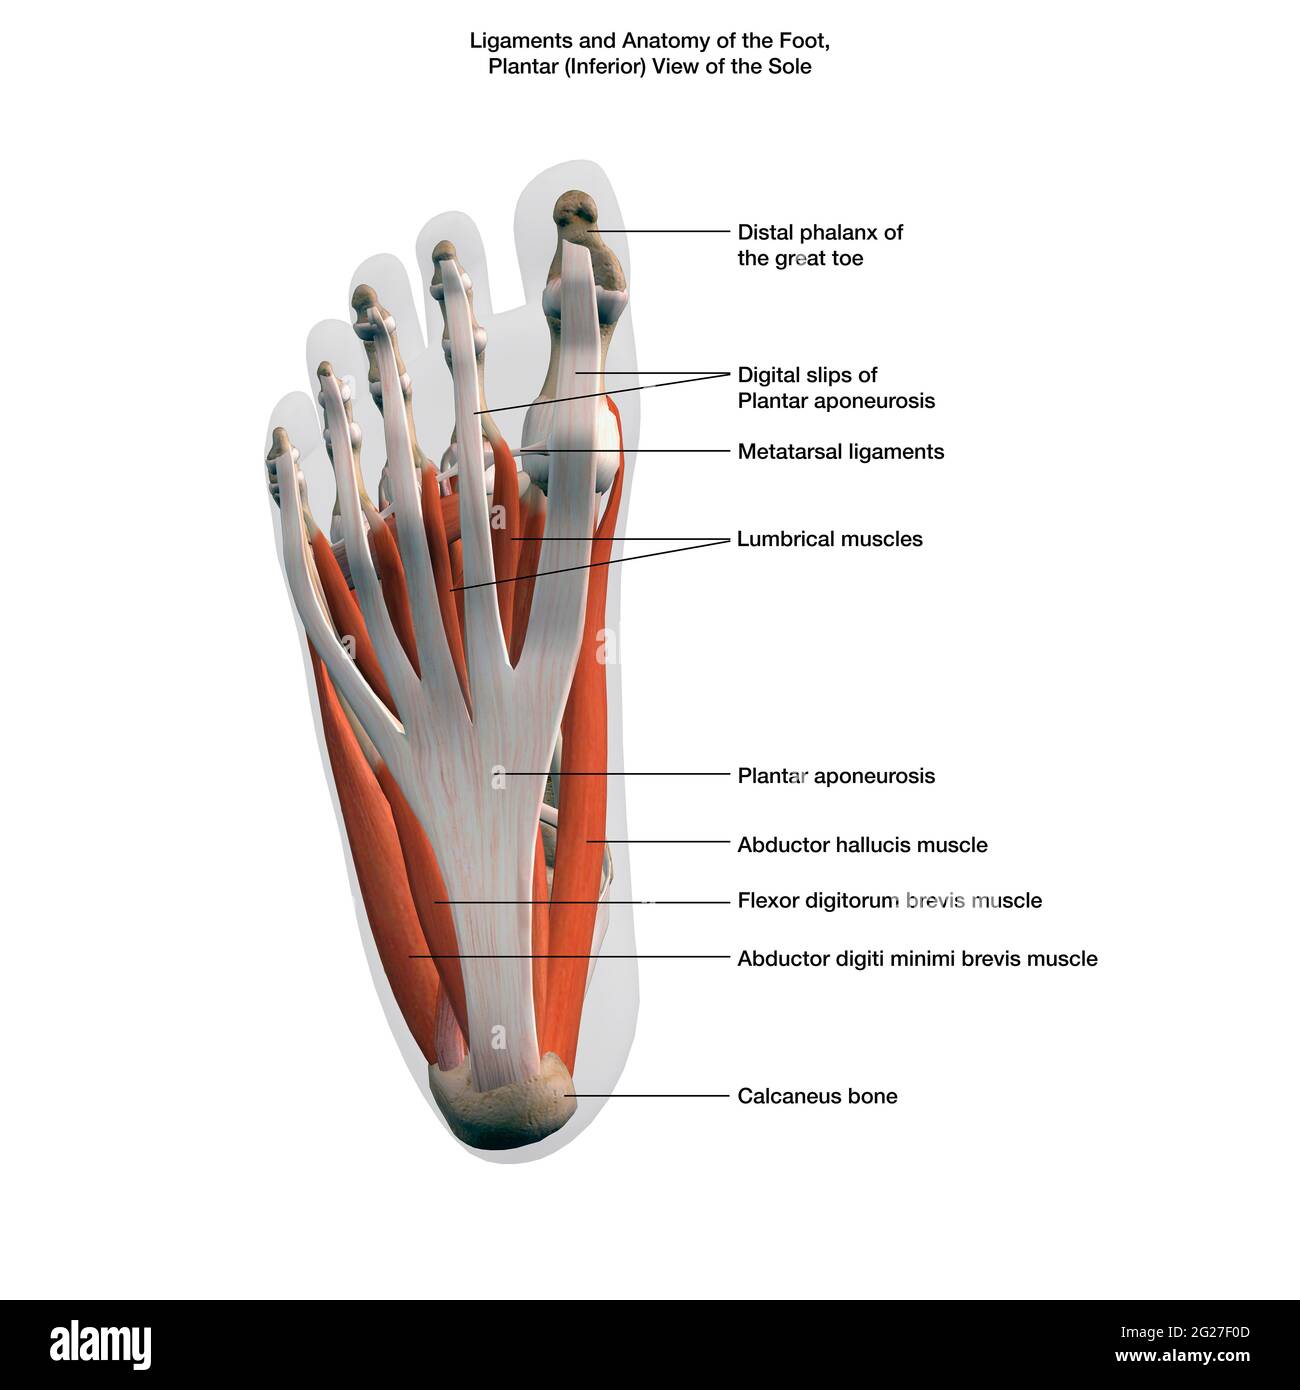 Ligaments and muscles of the human foot, planar view of the sole with labels. Stock Photo